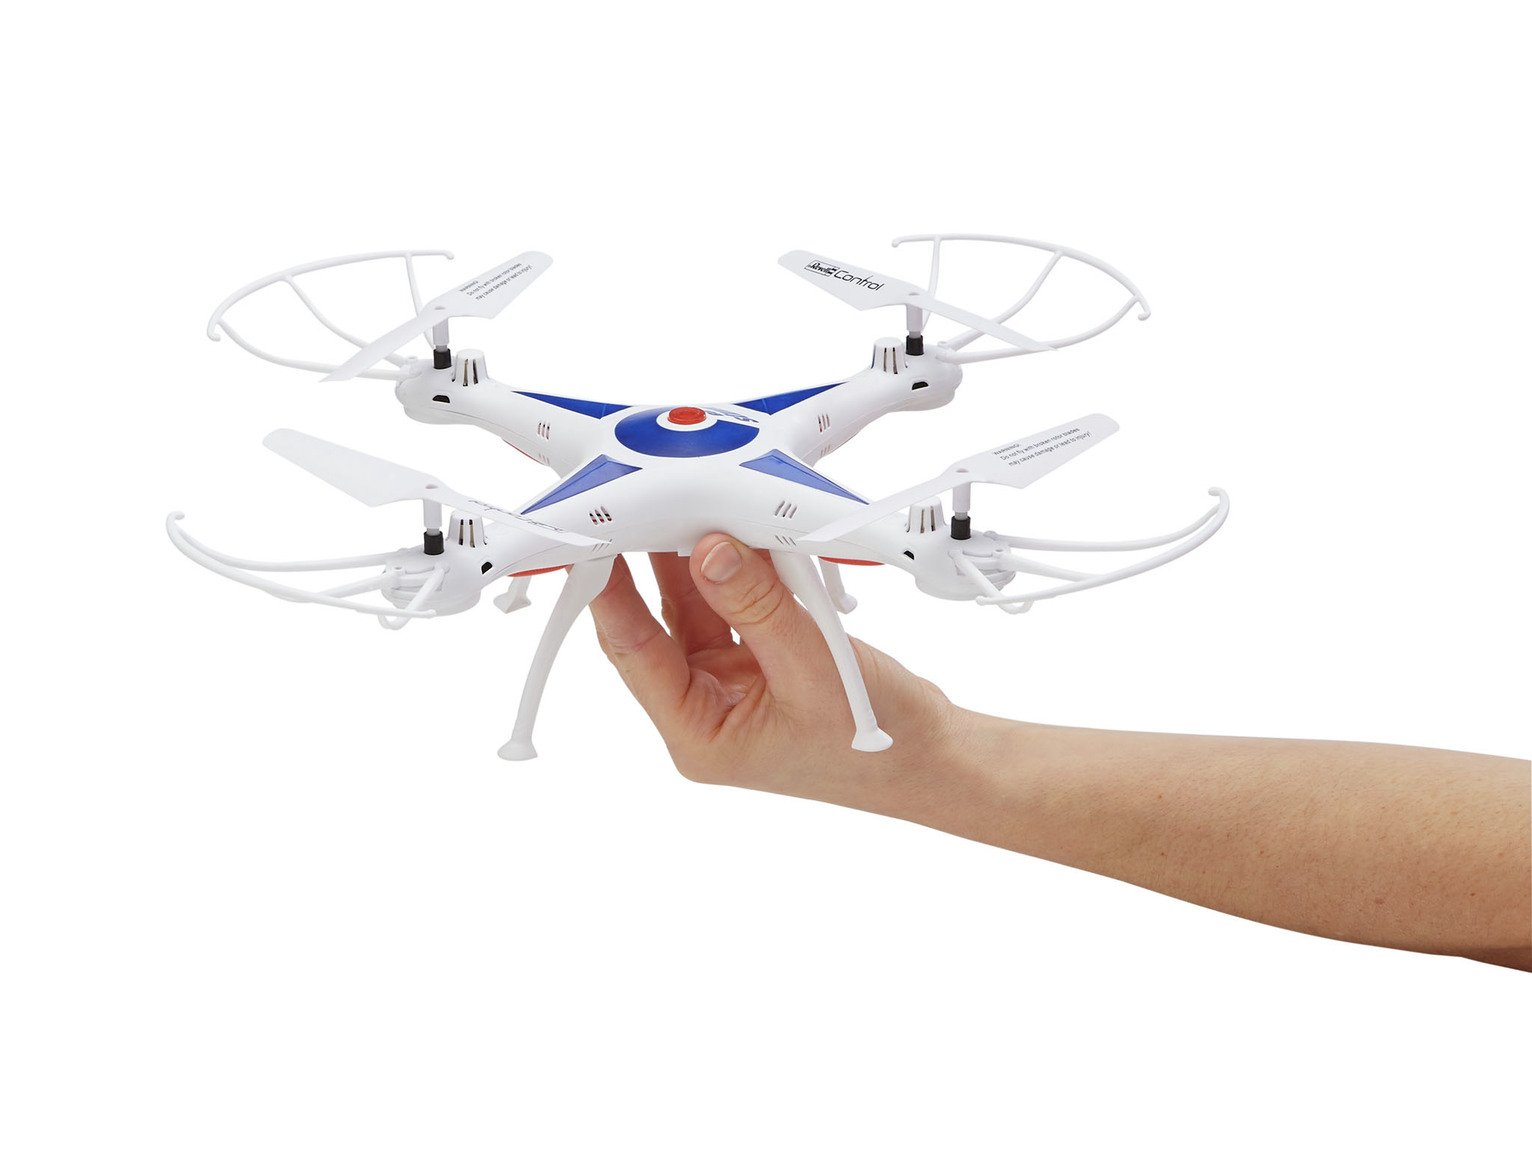 Revell GO! Stunt Quadcopter Drone Review